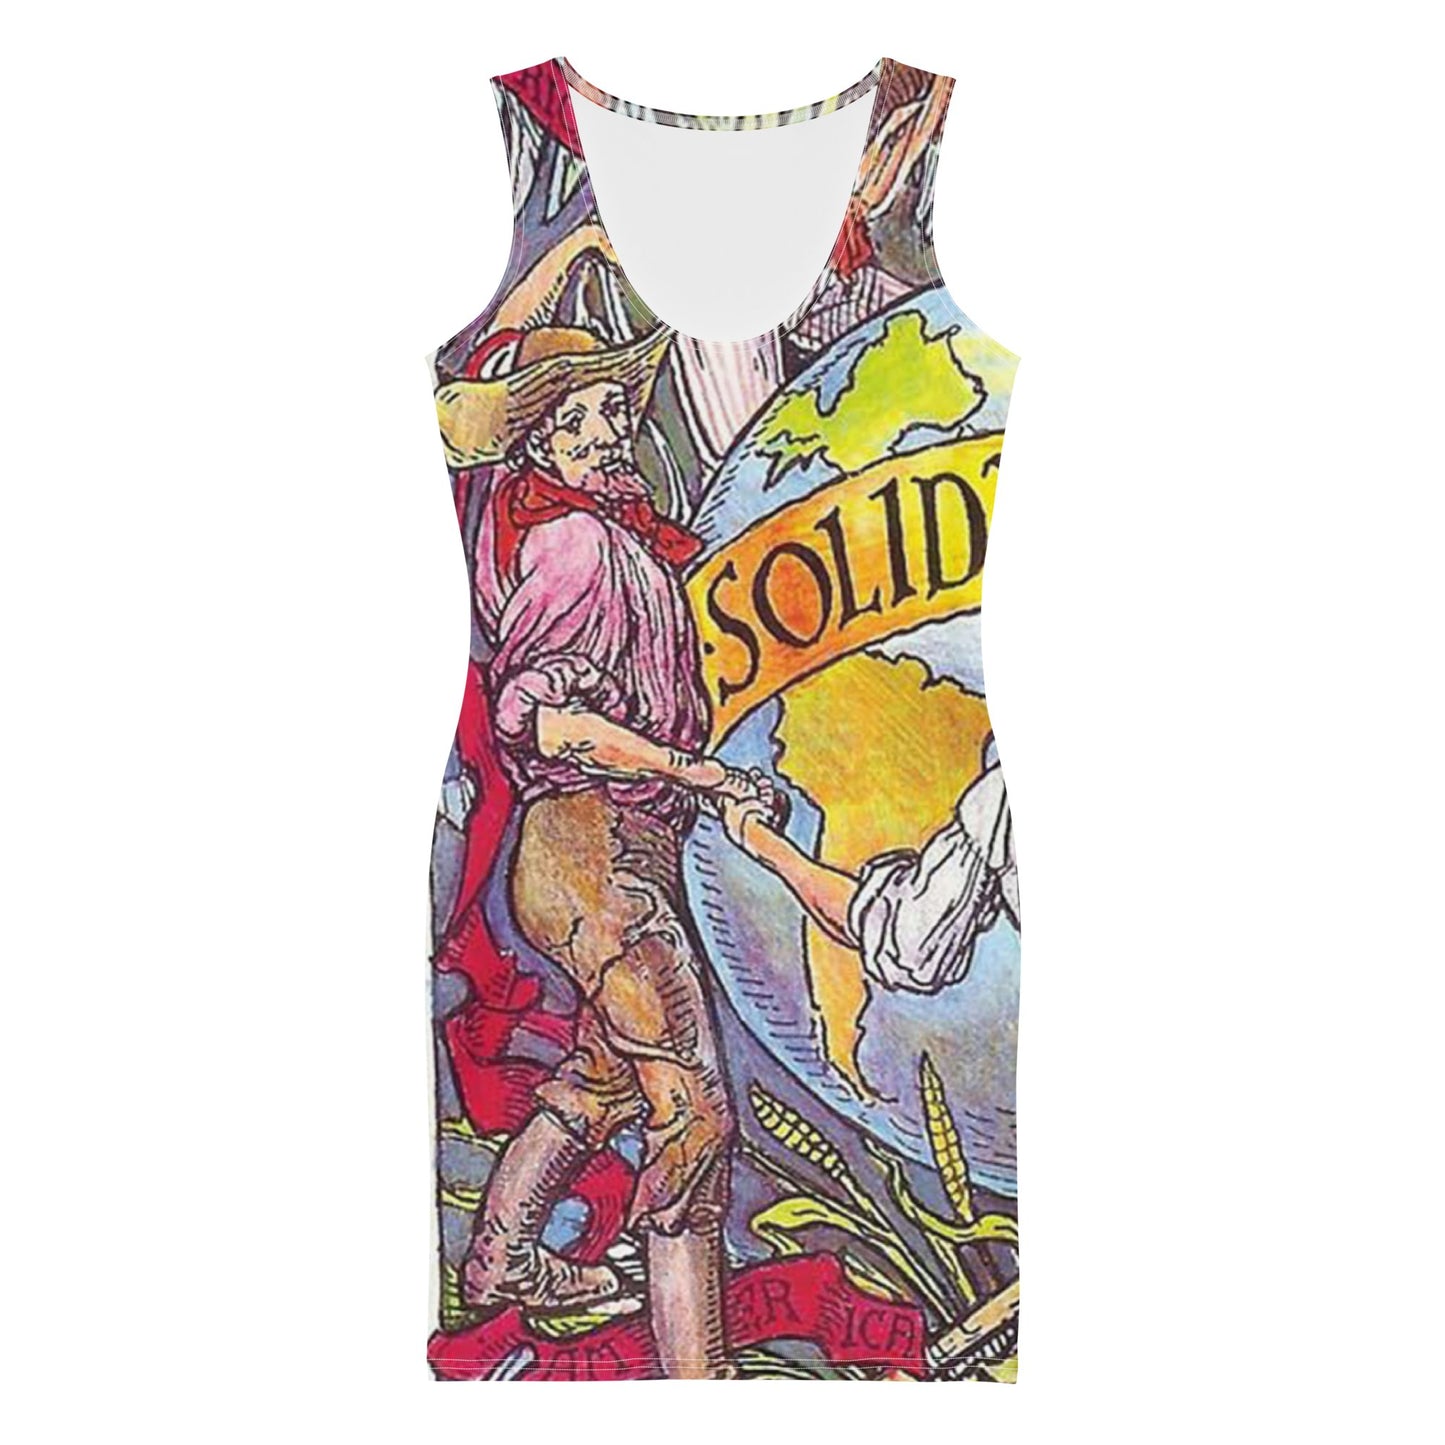 Solidarity - Bodycon dress - Souled Out World